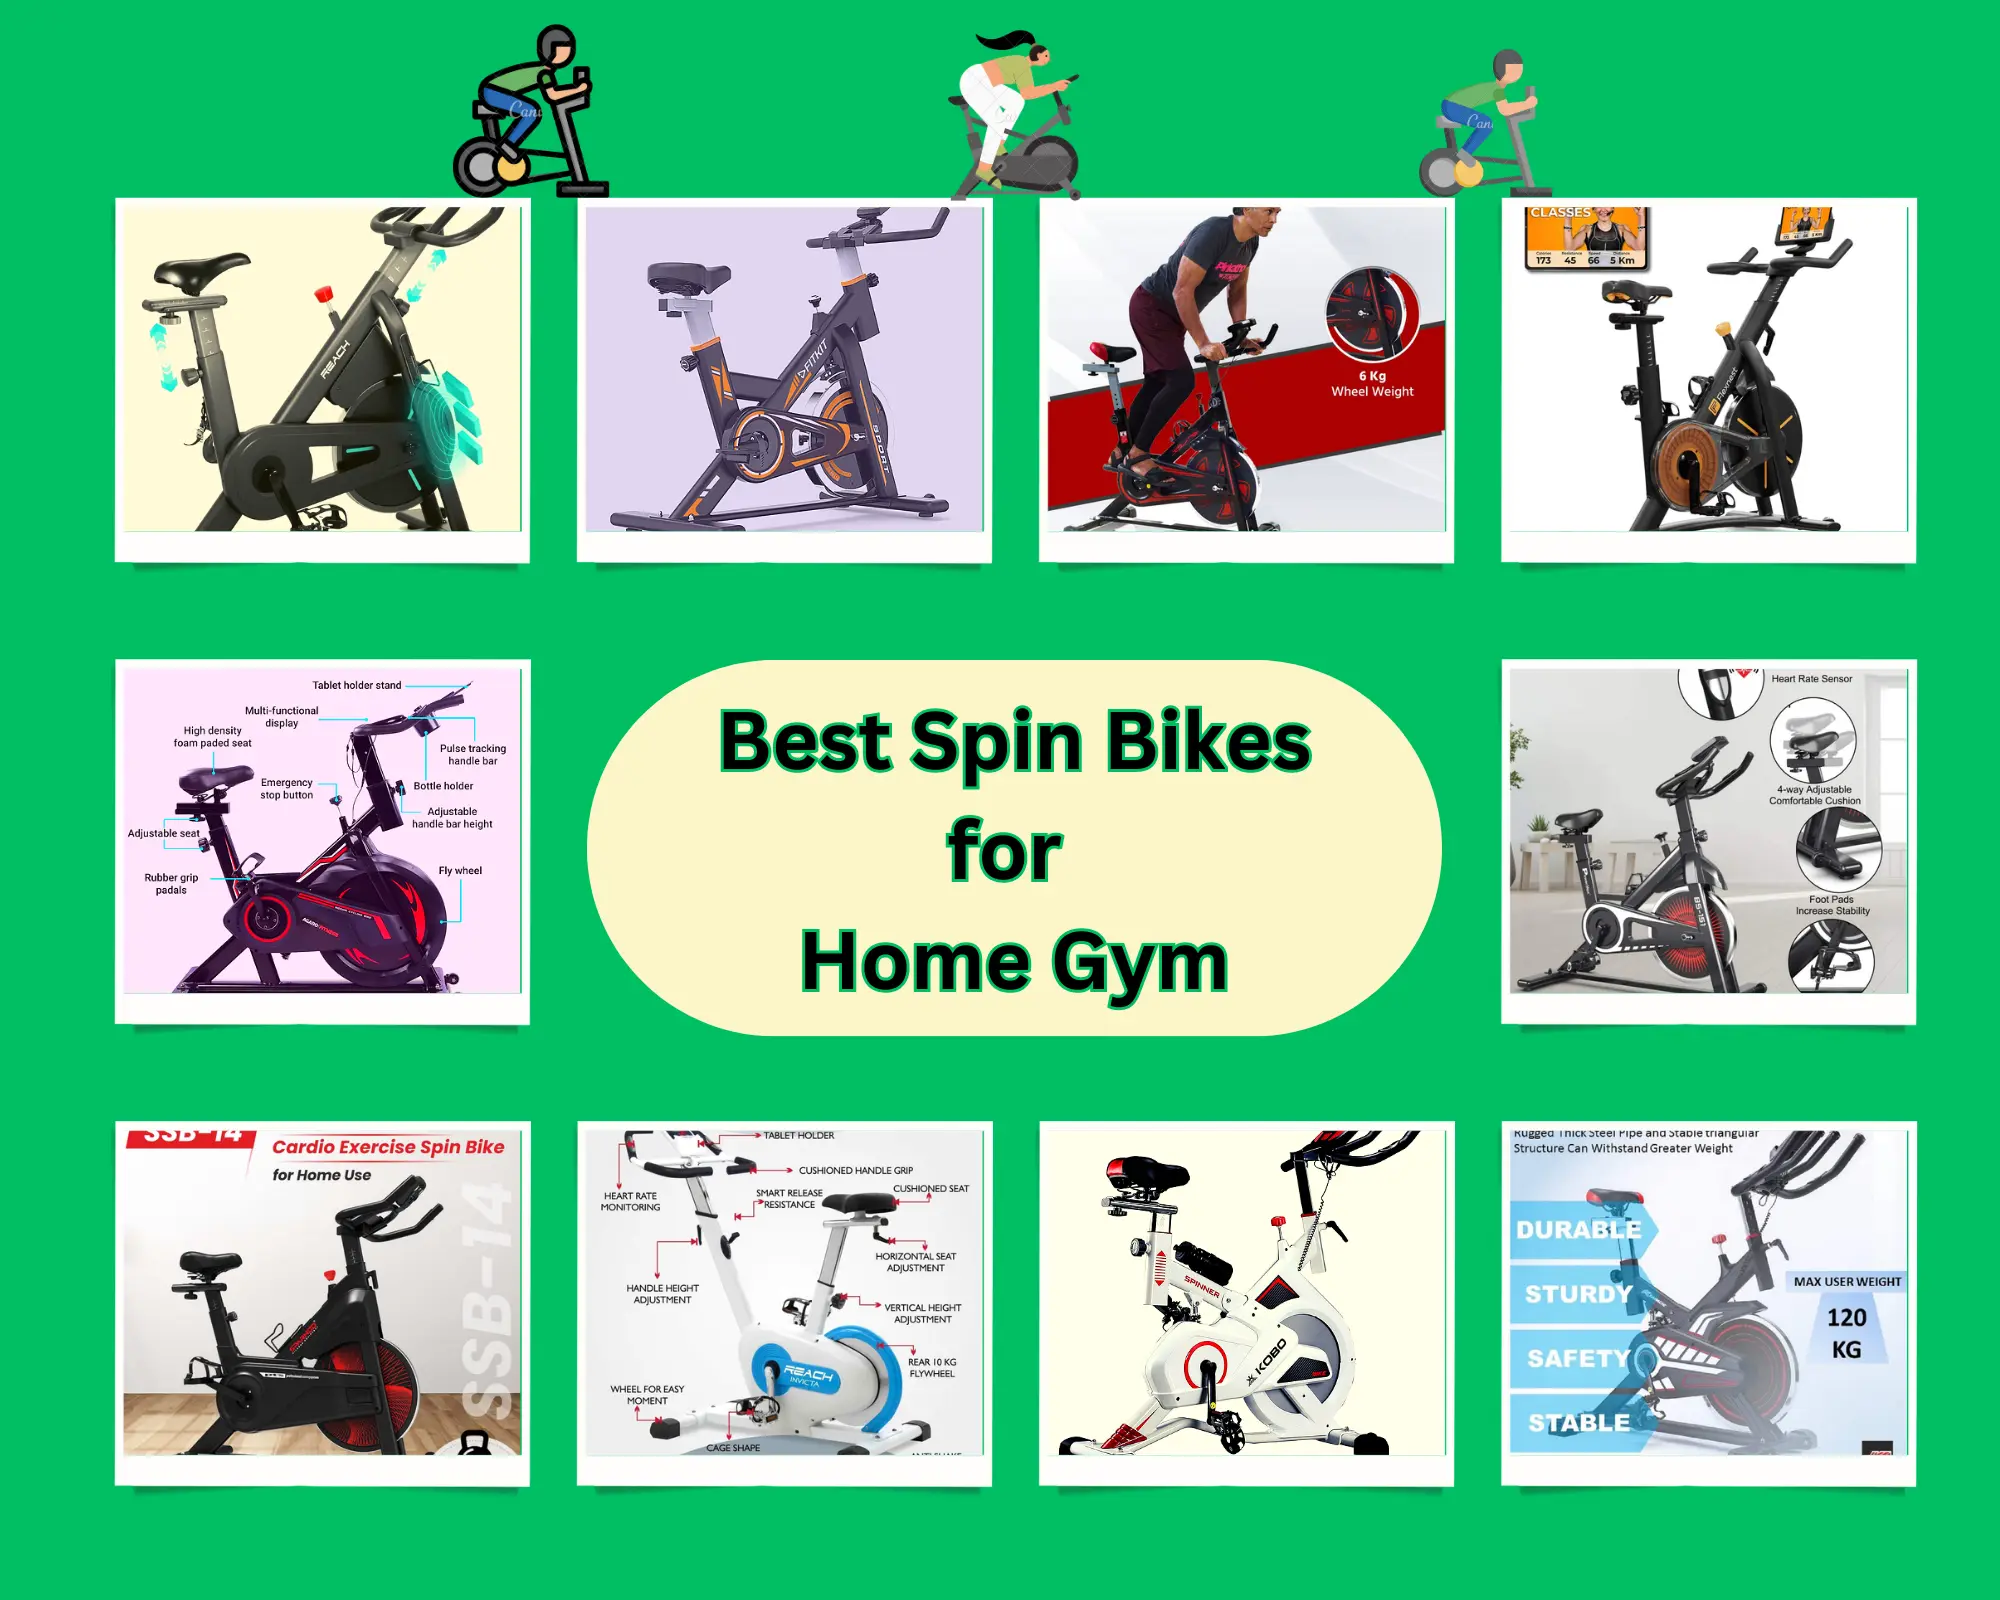 Best Sping Bikes for Home Gym